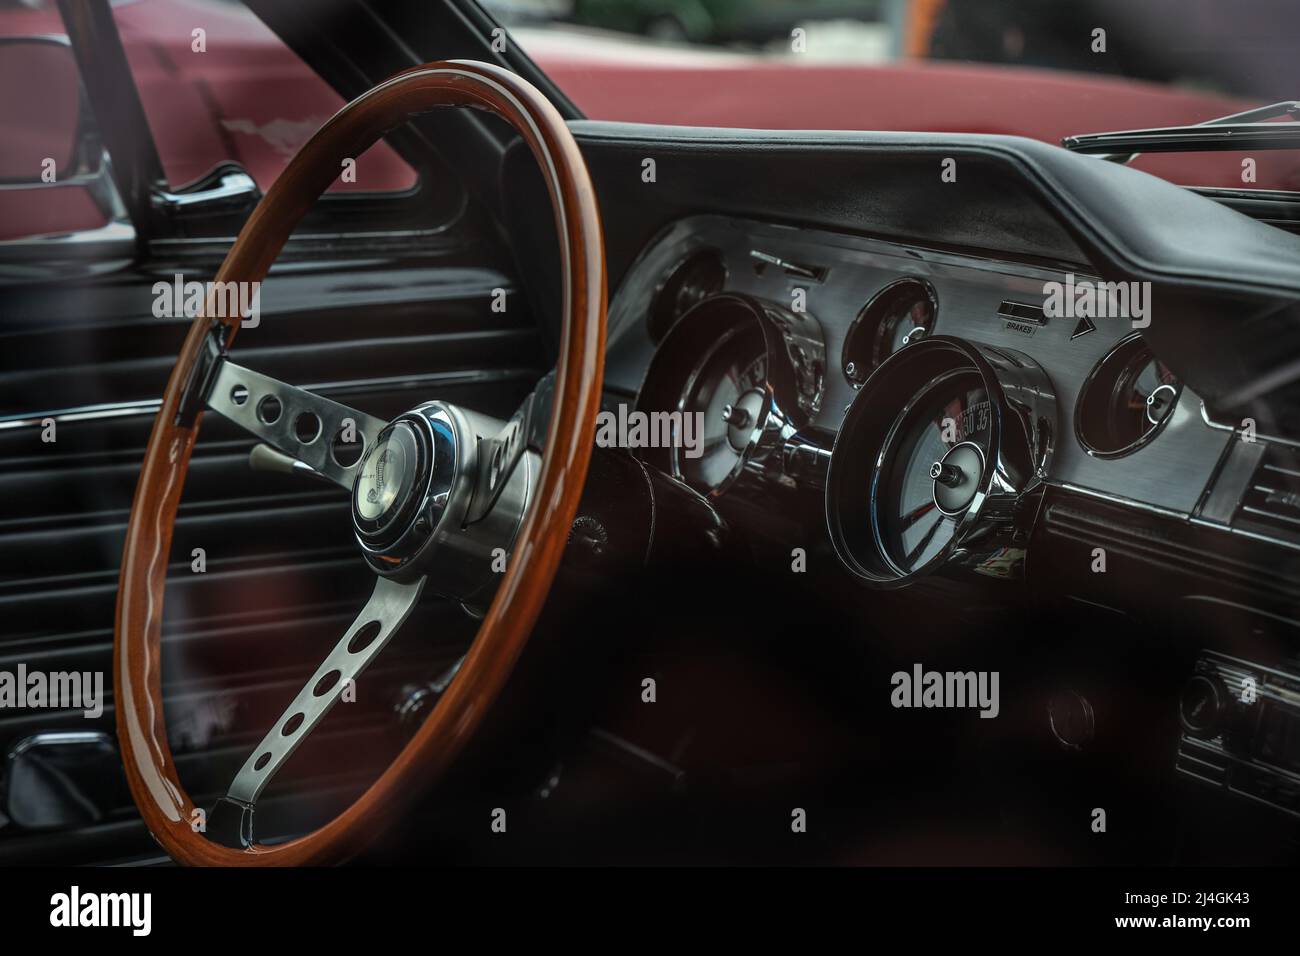 1967 Ford Mustang Shelby GT500 fastback interior Stock Photo